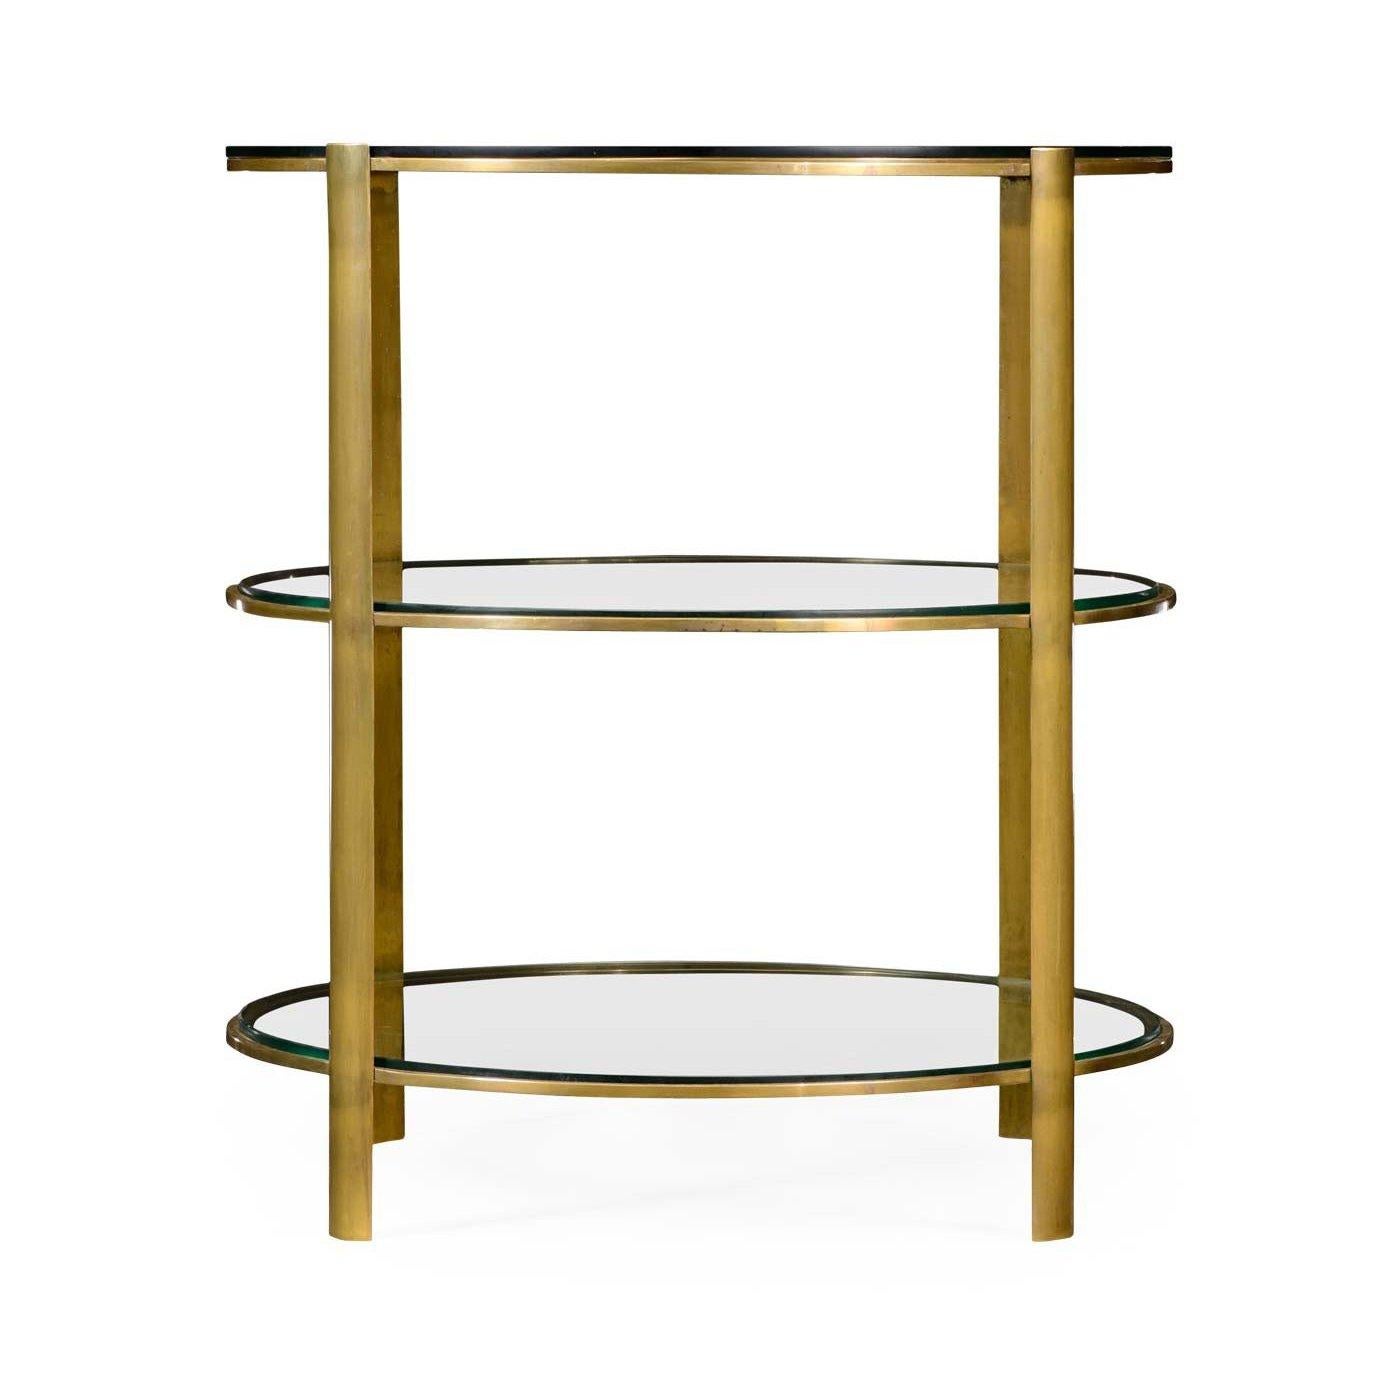 Modern French brass and glass three-tier round side tables with gently curved legs.

Dimensions: 24